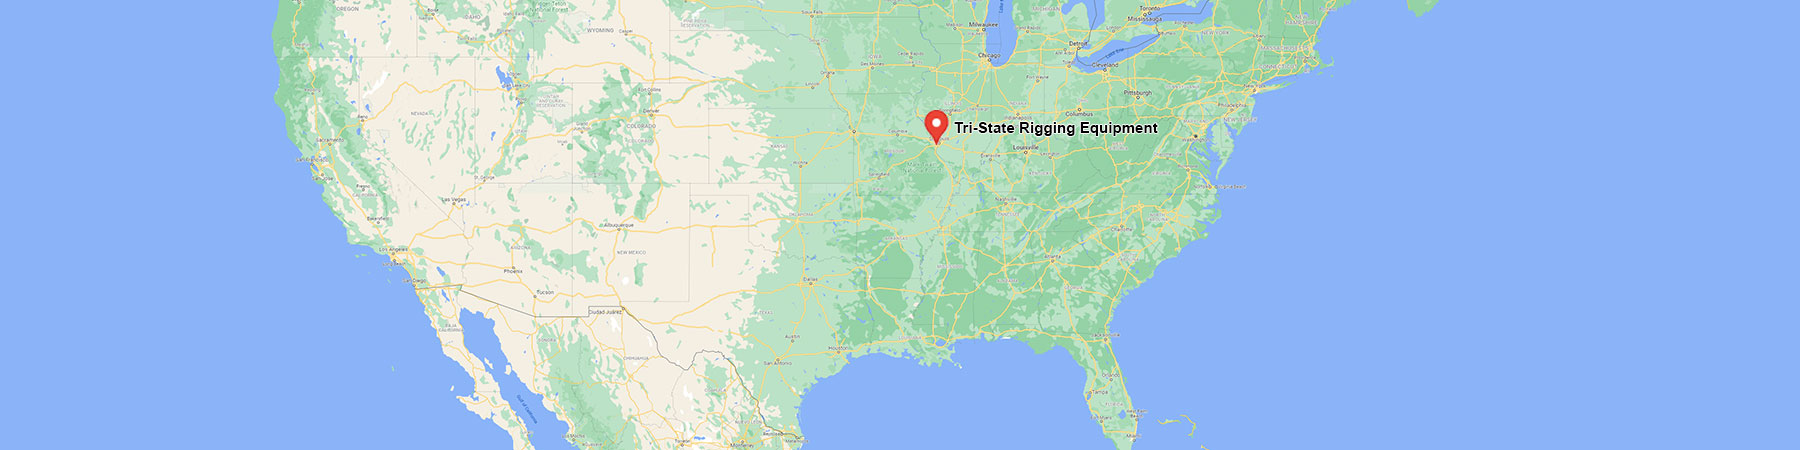 Map of Tri-State Rigging Equipment Location